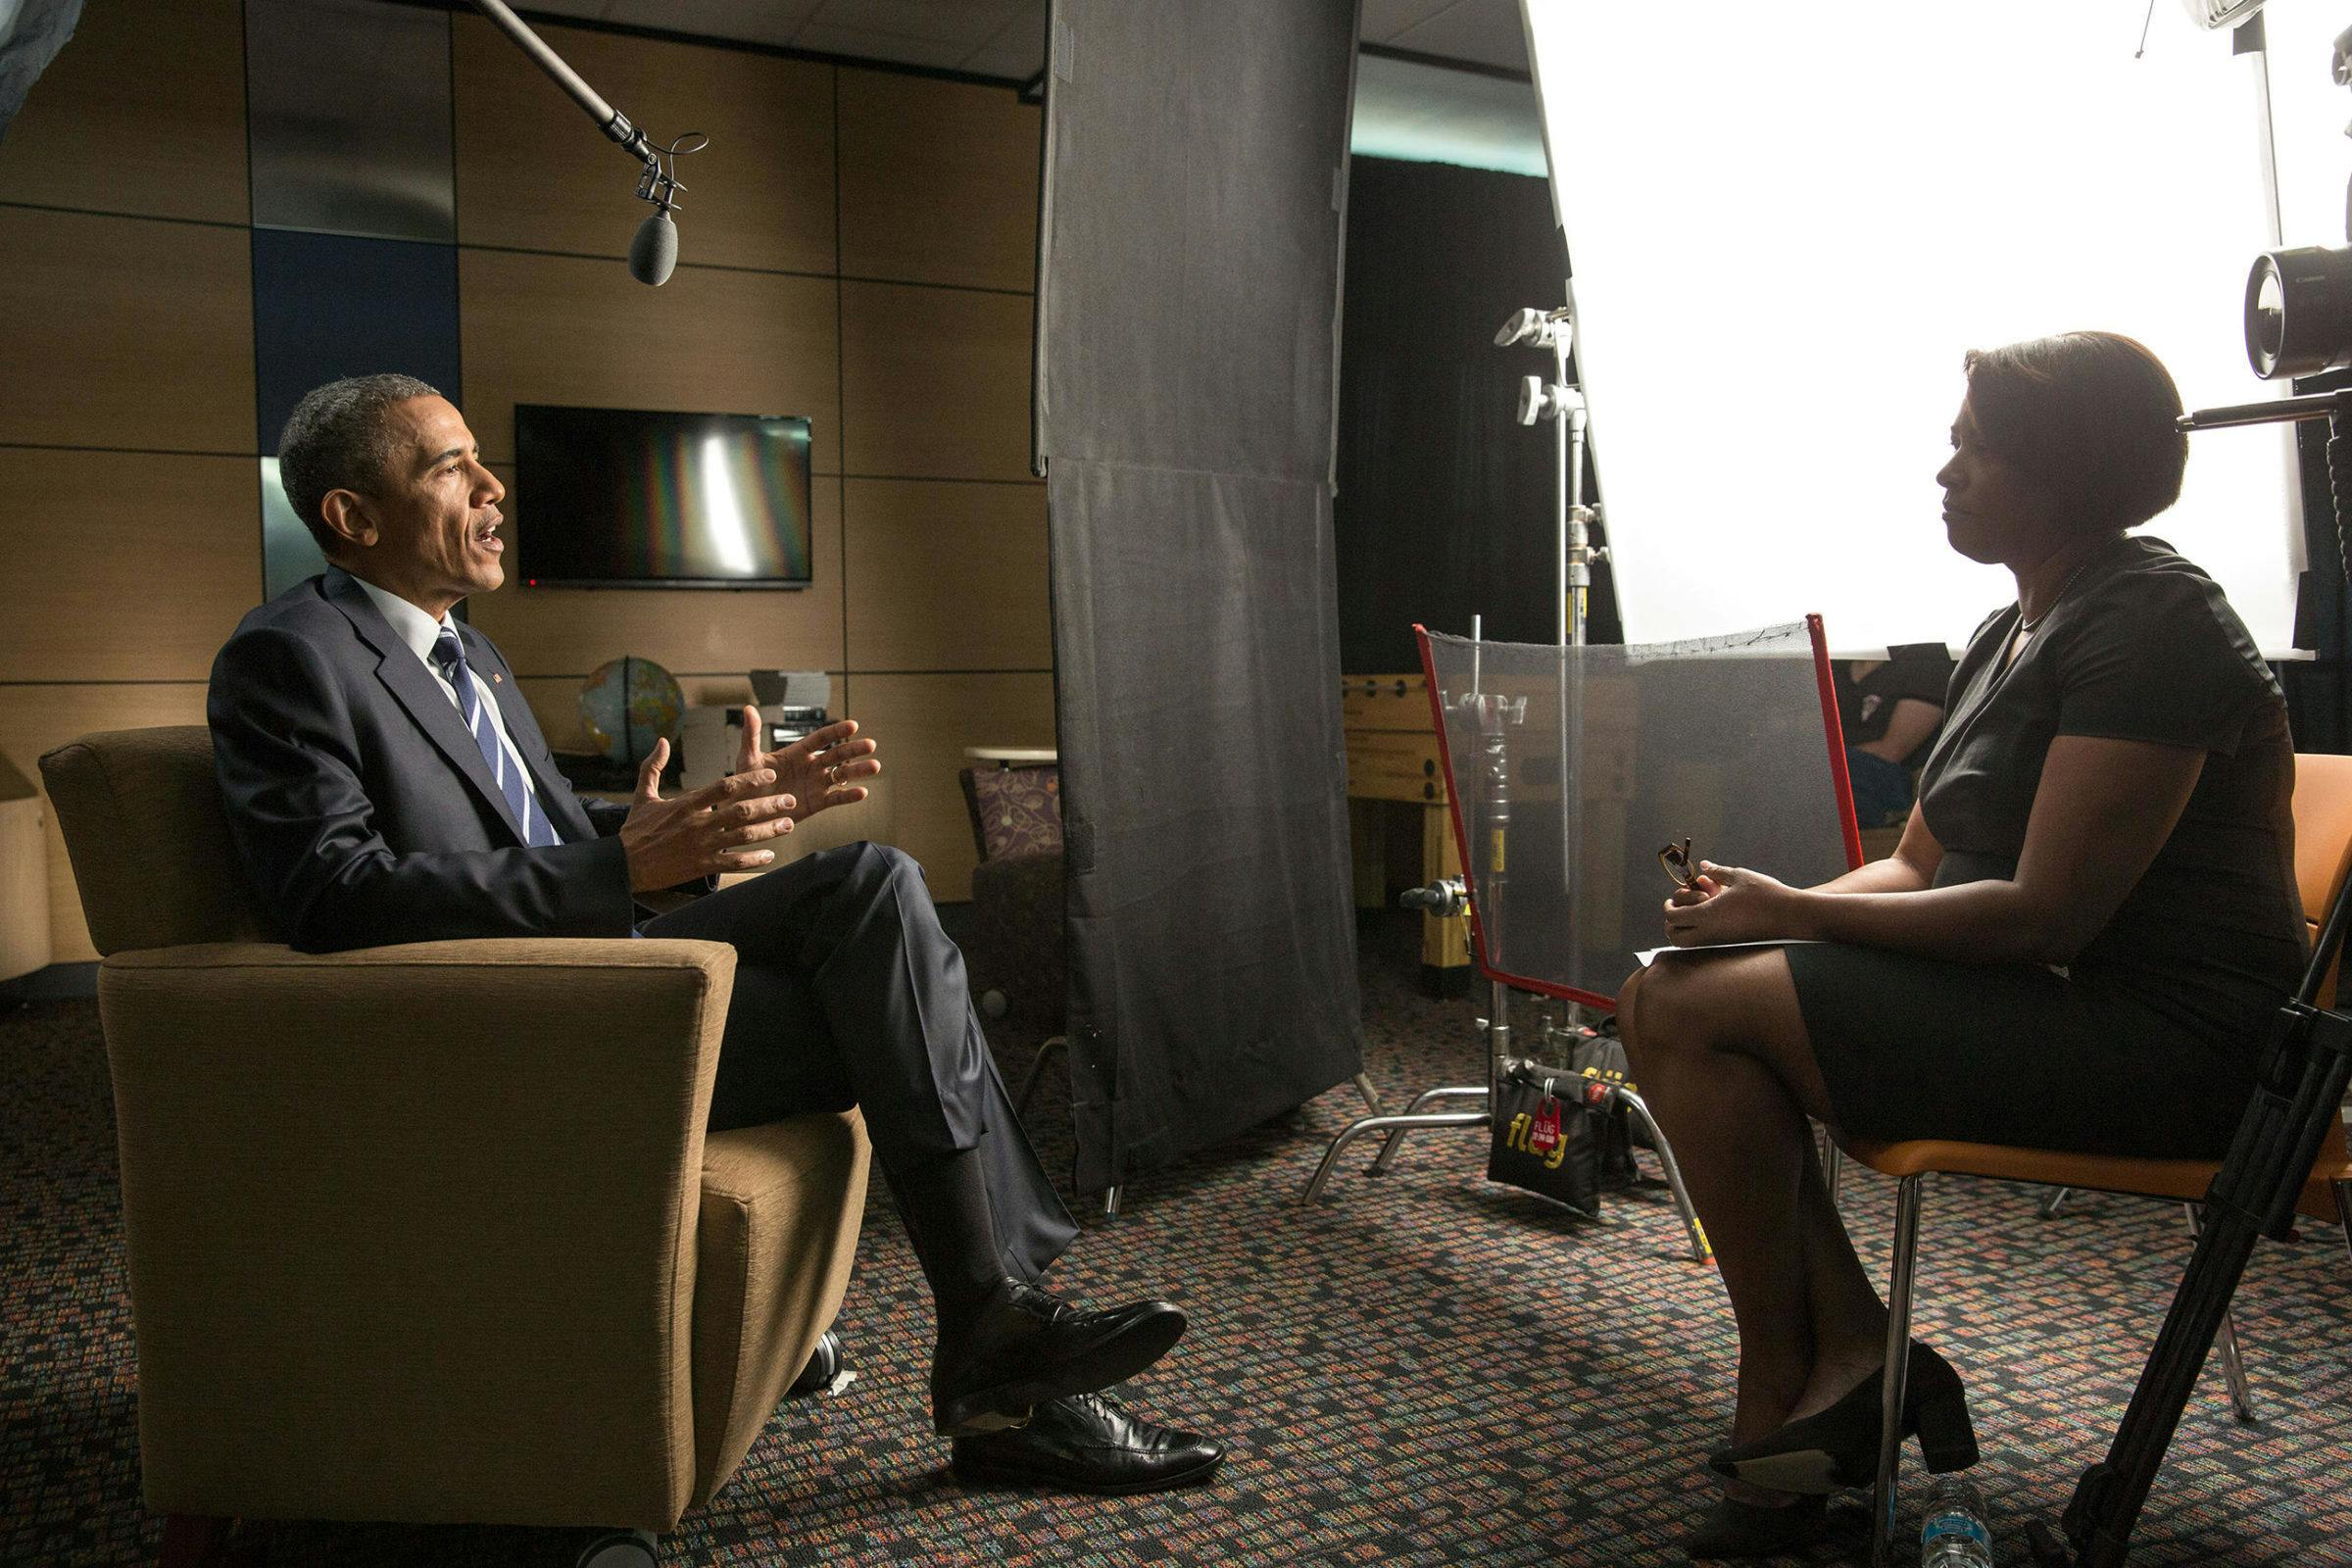 President Obama being interviewed about the film